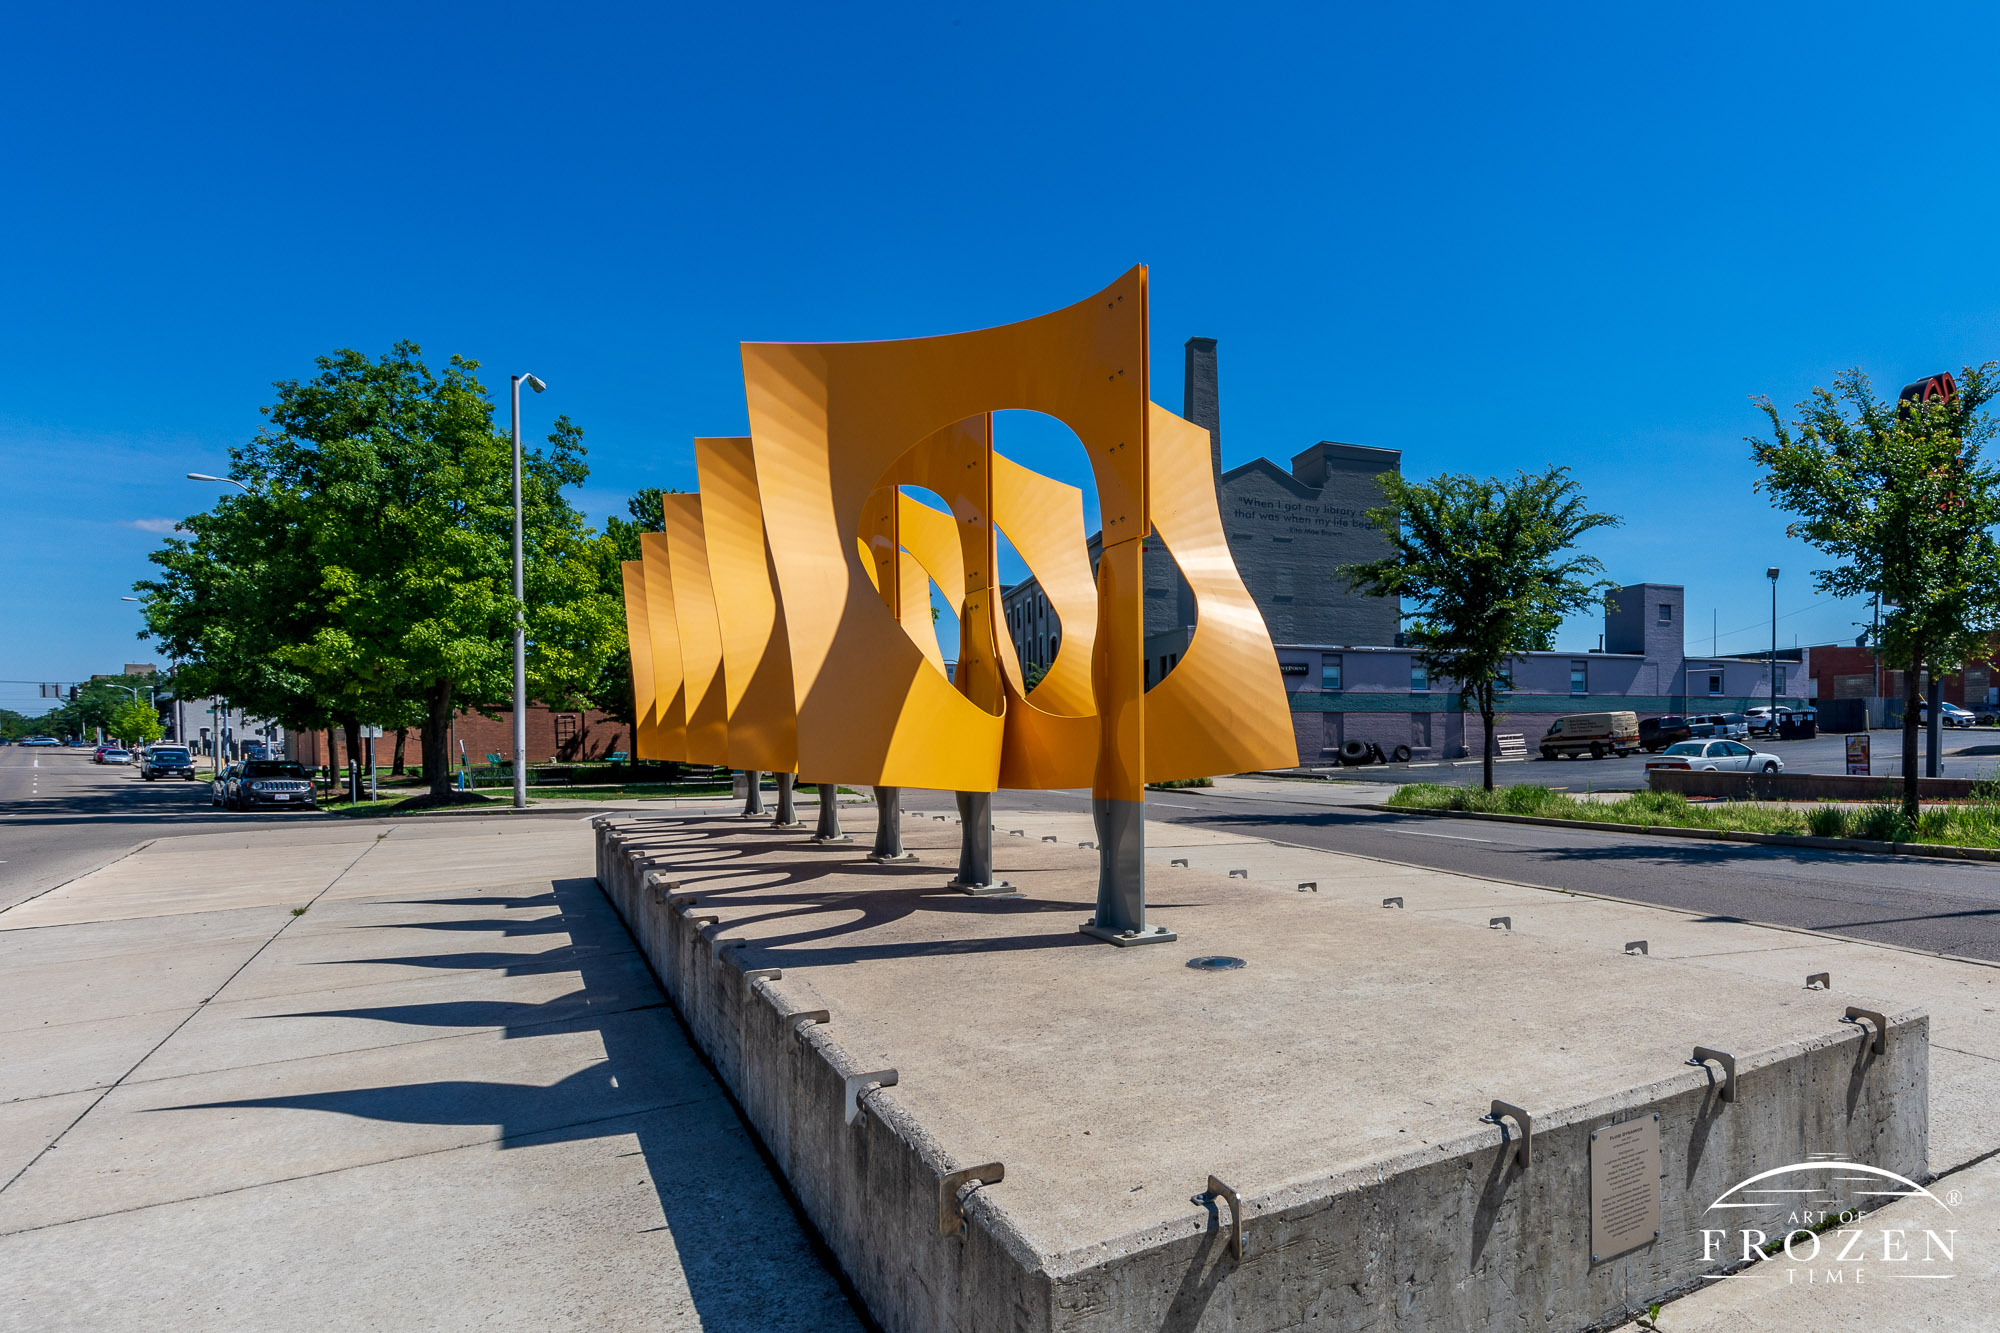 A bright yellow sculpture in Dayton Ohio consisting of 6 laser cut aluminum panels depicting the natural flow of water and air